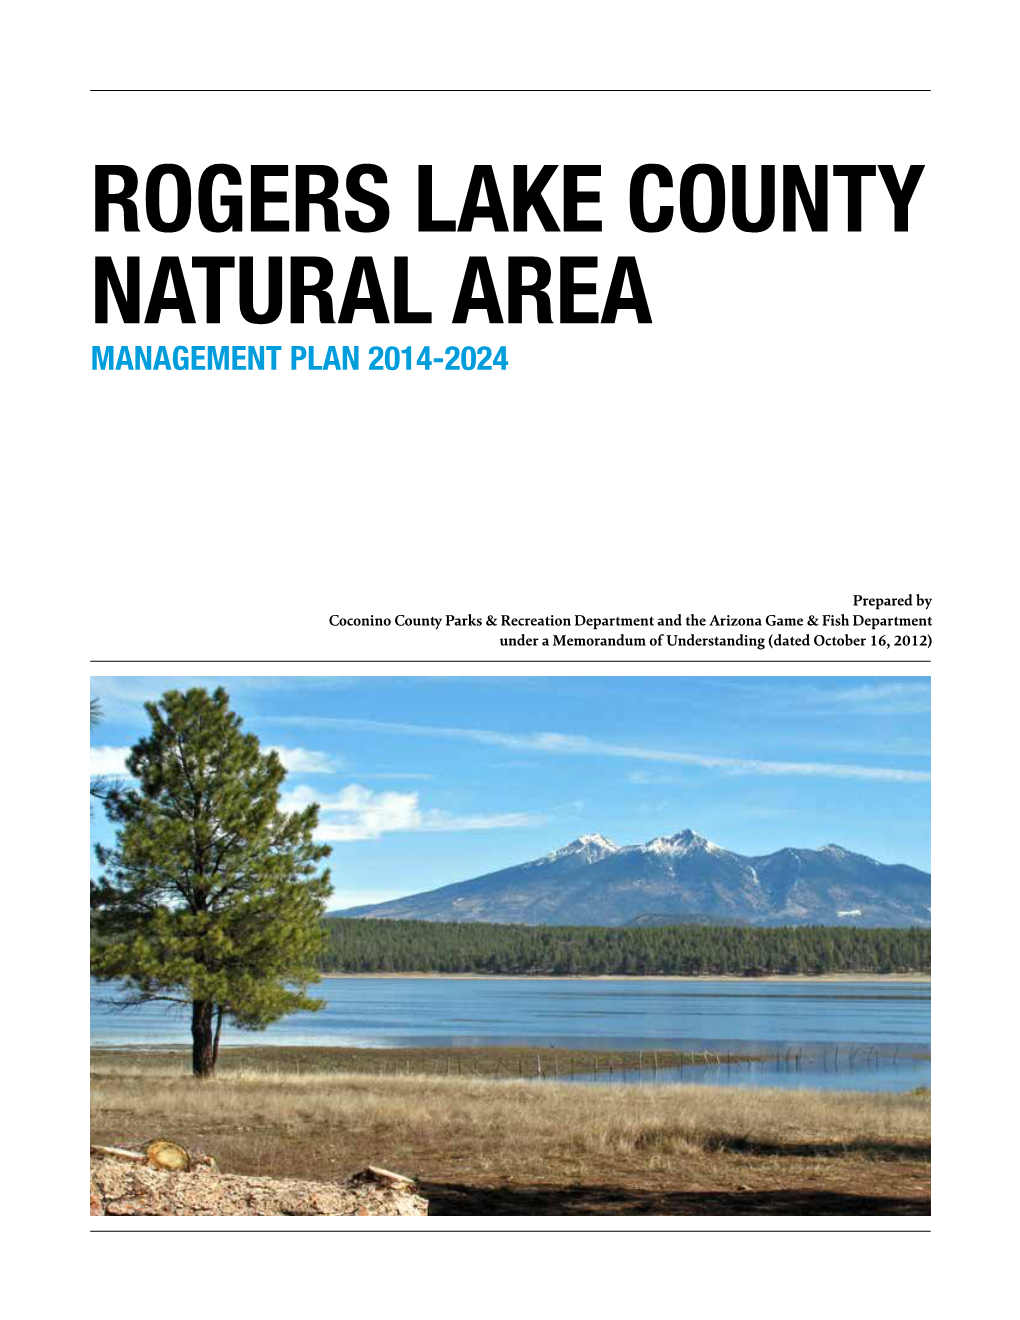 Rogers Lake County Natural Area Management Plan 2014-2024